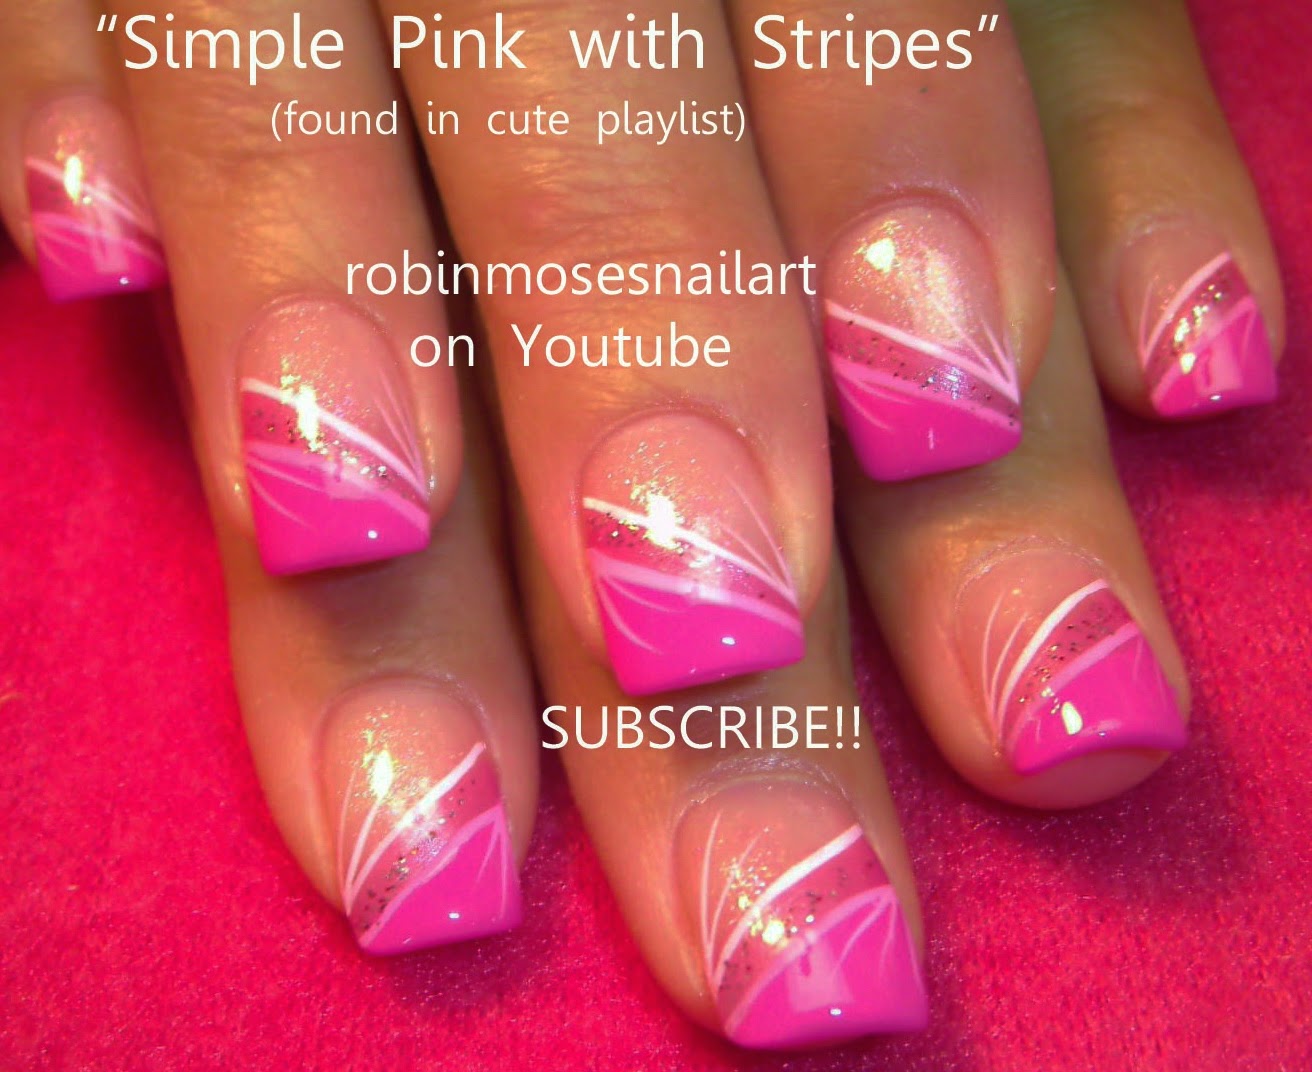 3. Glittery Pink and Gold Striped Nails - wide 3